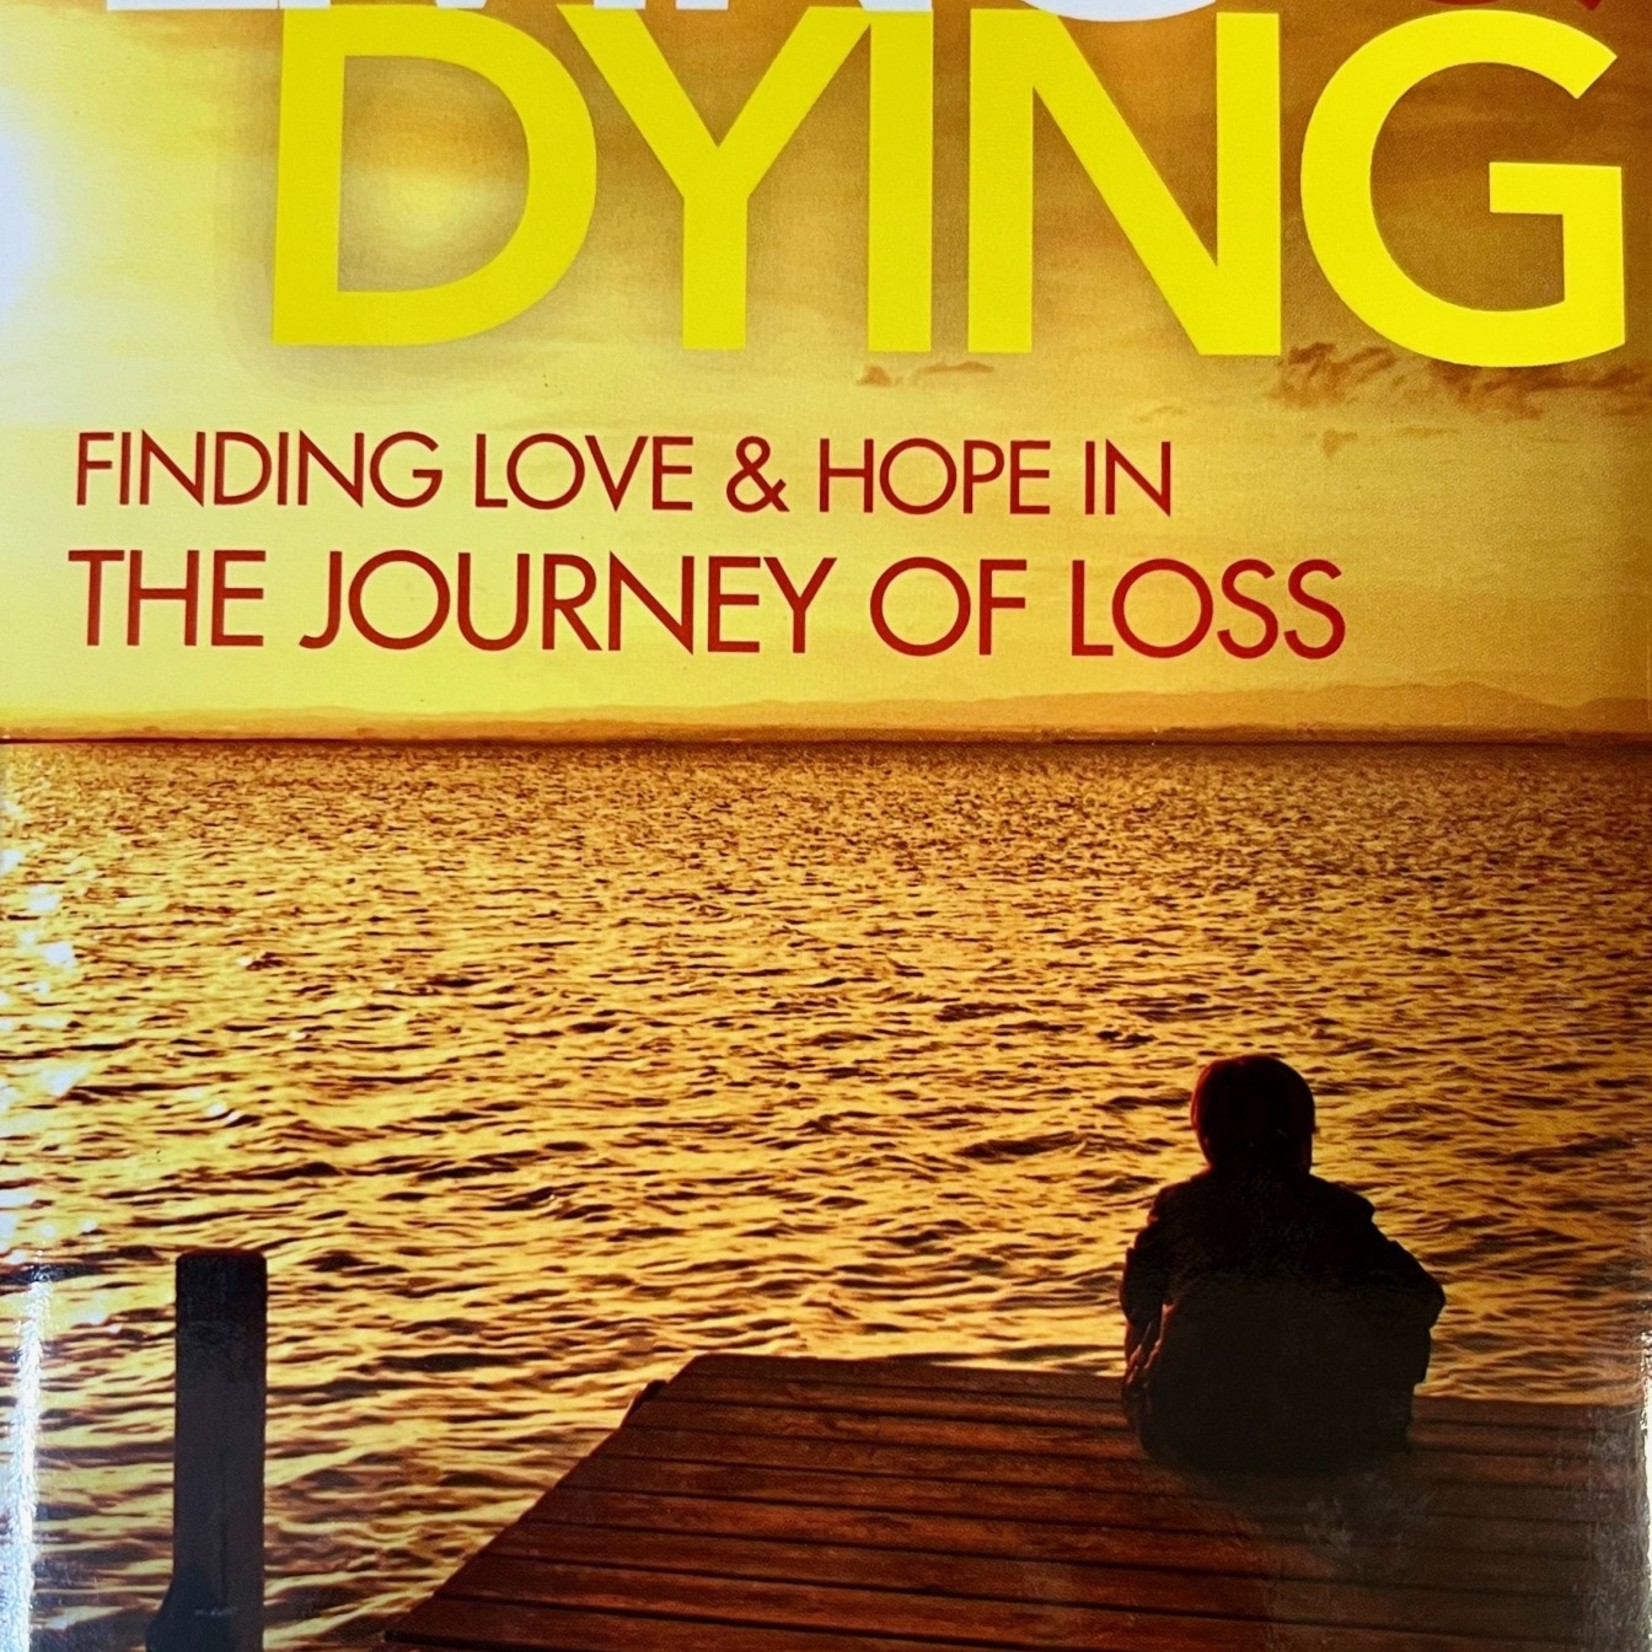 Mark K. Anthony "Living & Dying: Finding Love & Hope in the Journey of Loss;" book, MARK